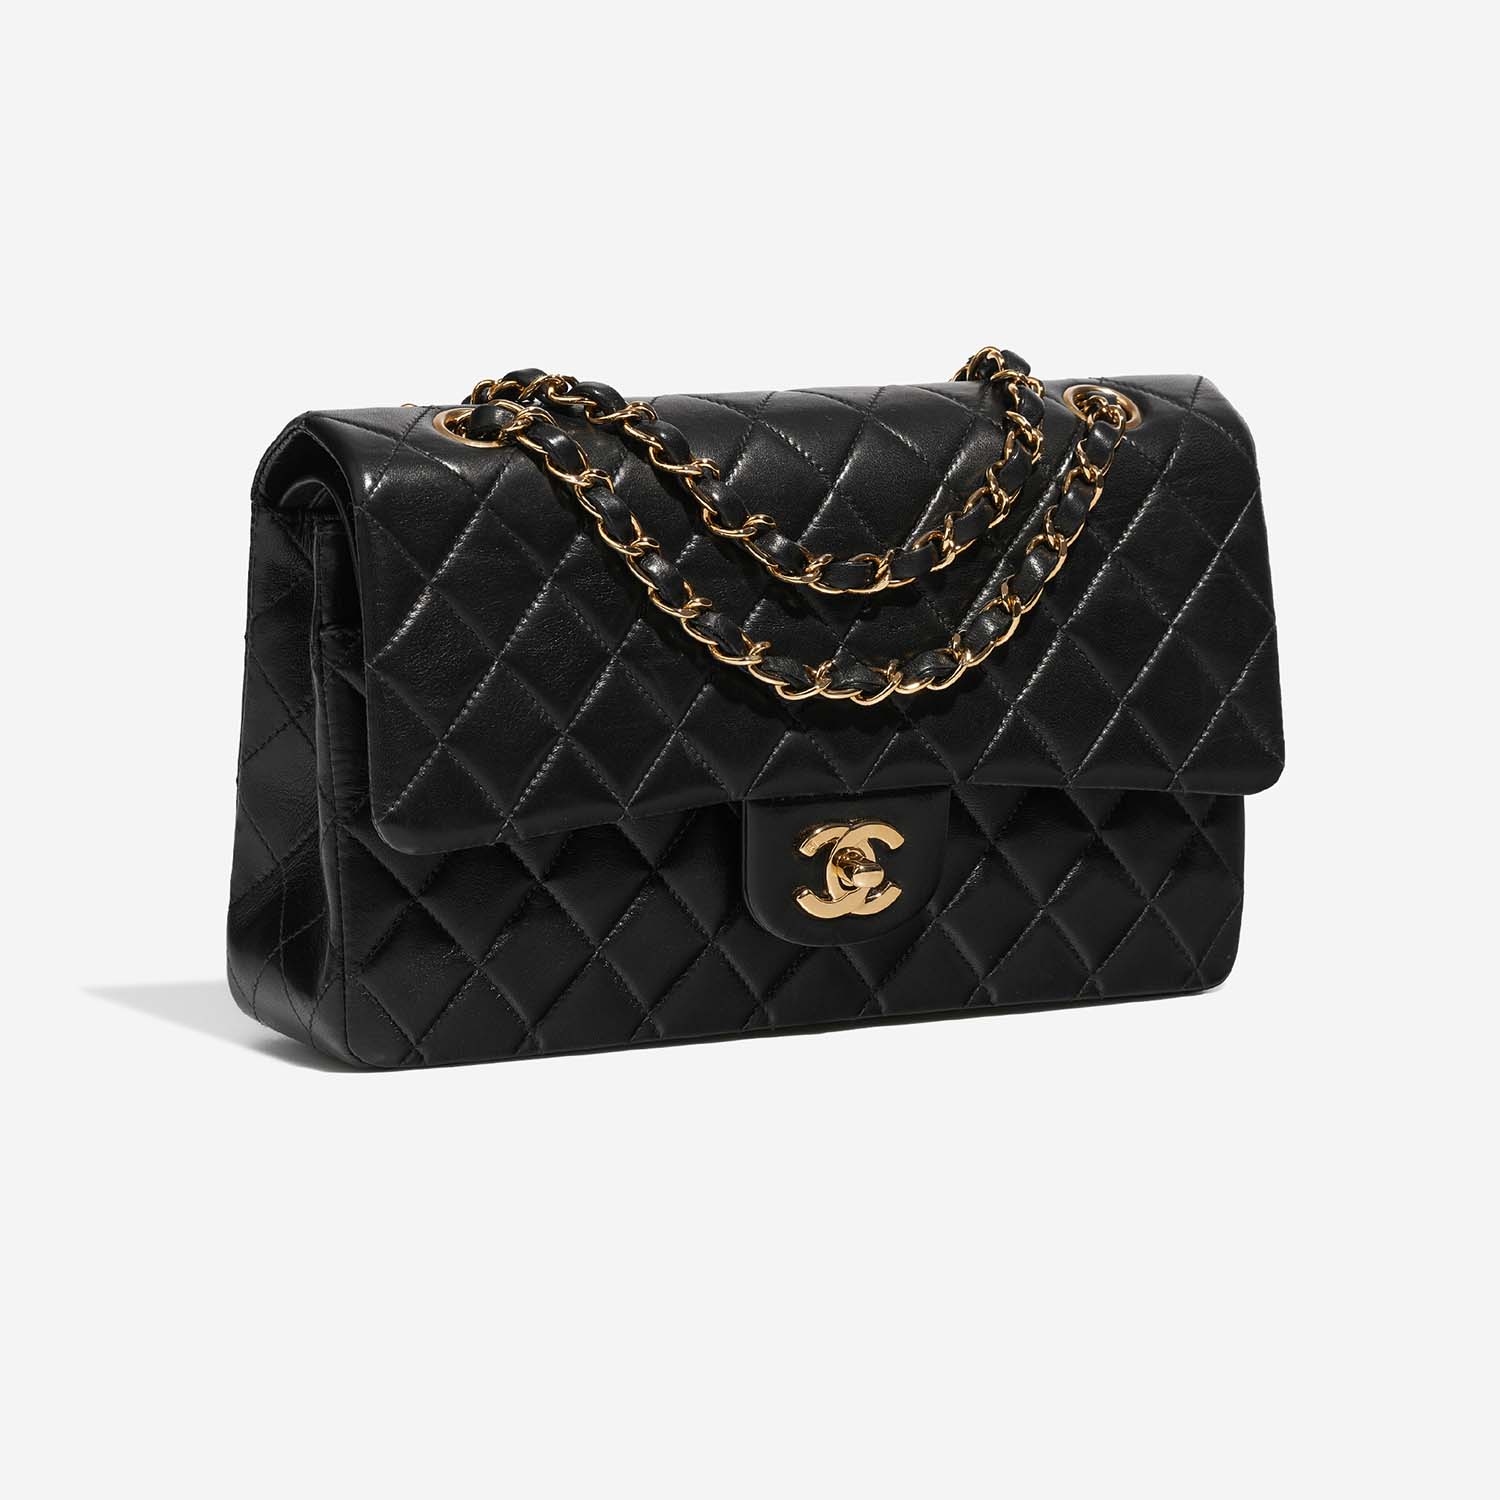 CHANEL Pre-Owned 2003 Petite Shopping Tote bag, Black